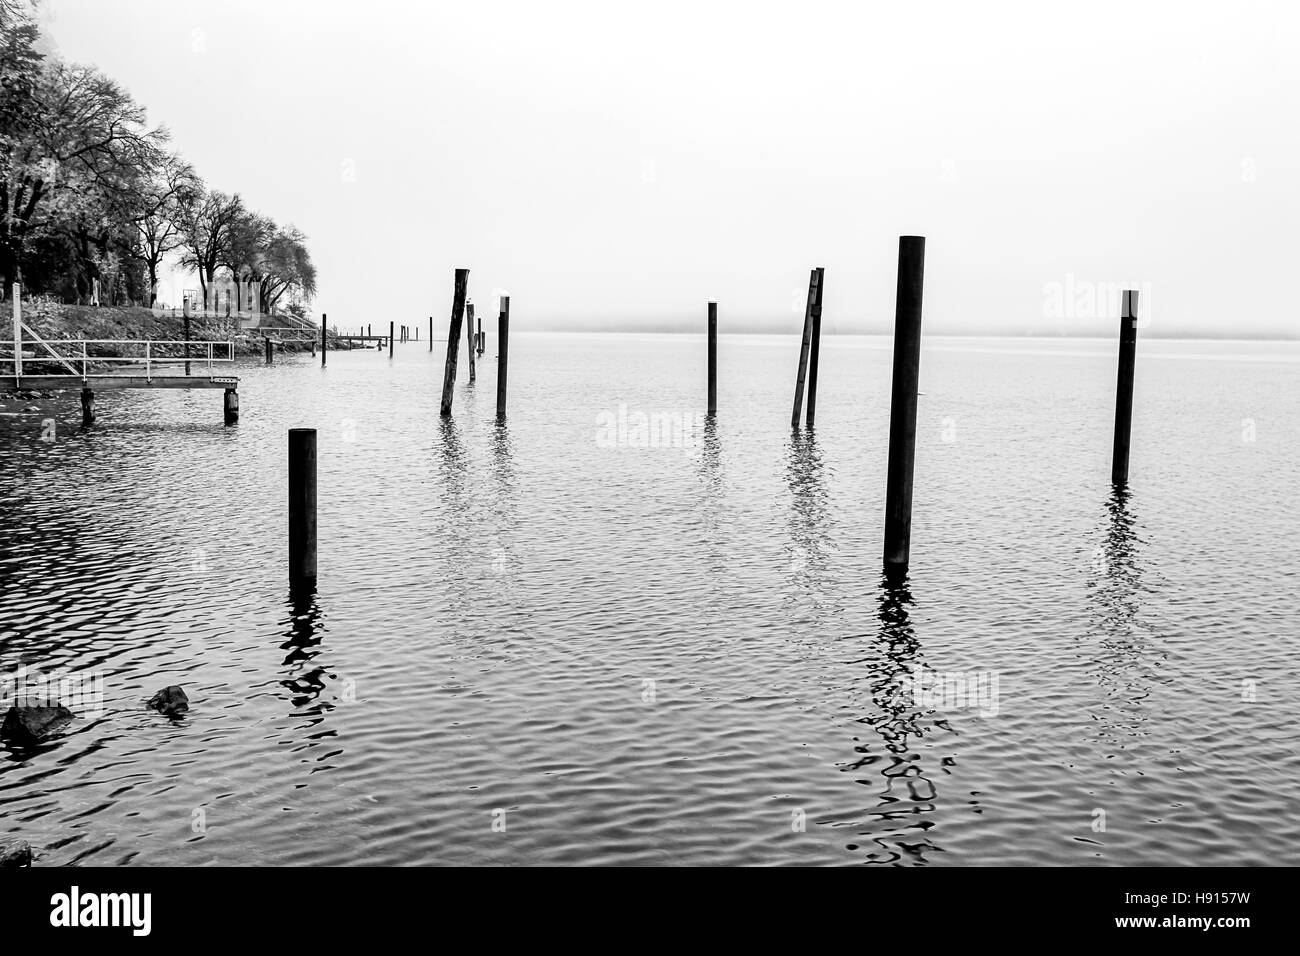 A B&W image of wood pilings in the water of Coeur d'Alene Lake in Idaho on a foggy day. Stock Photo